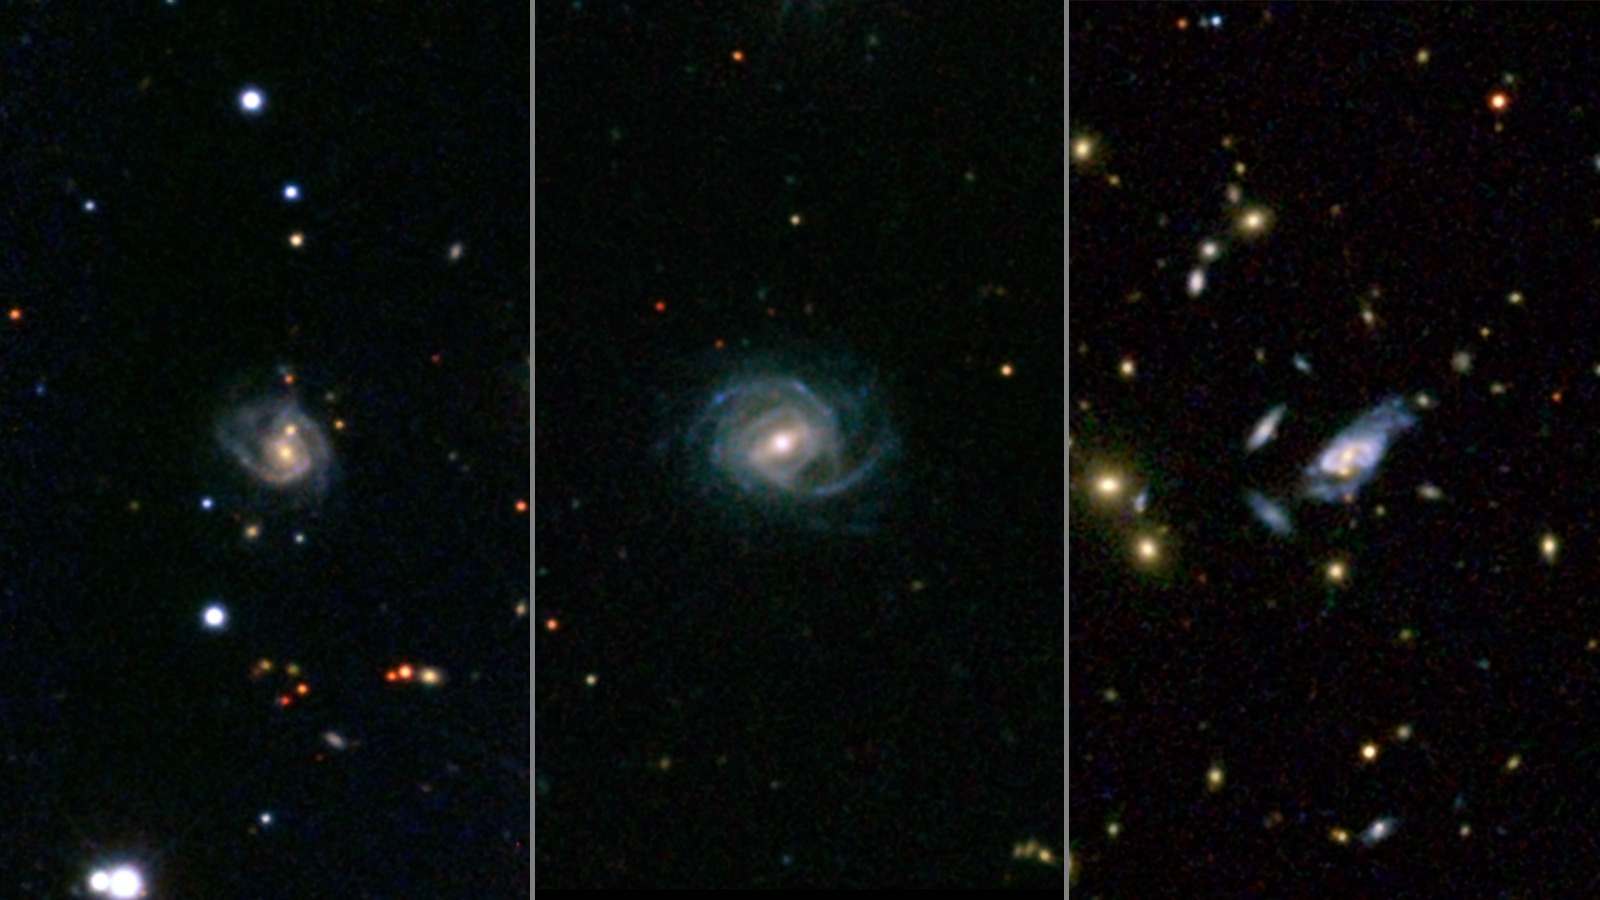 A team of astronomers has recently discovered a total of 53 'super spiral' galaxies which are enormous in size, three of which are shown in the image above. The galaxies shown at the left and center images also exhibit a double nucleus, which could be the result of a past galactic merger. Image Credit: Sloan Digital Sky Survey